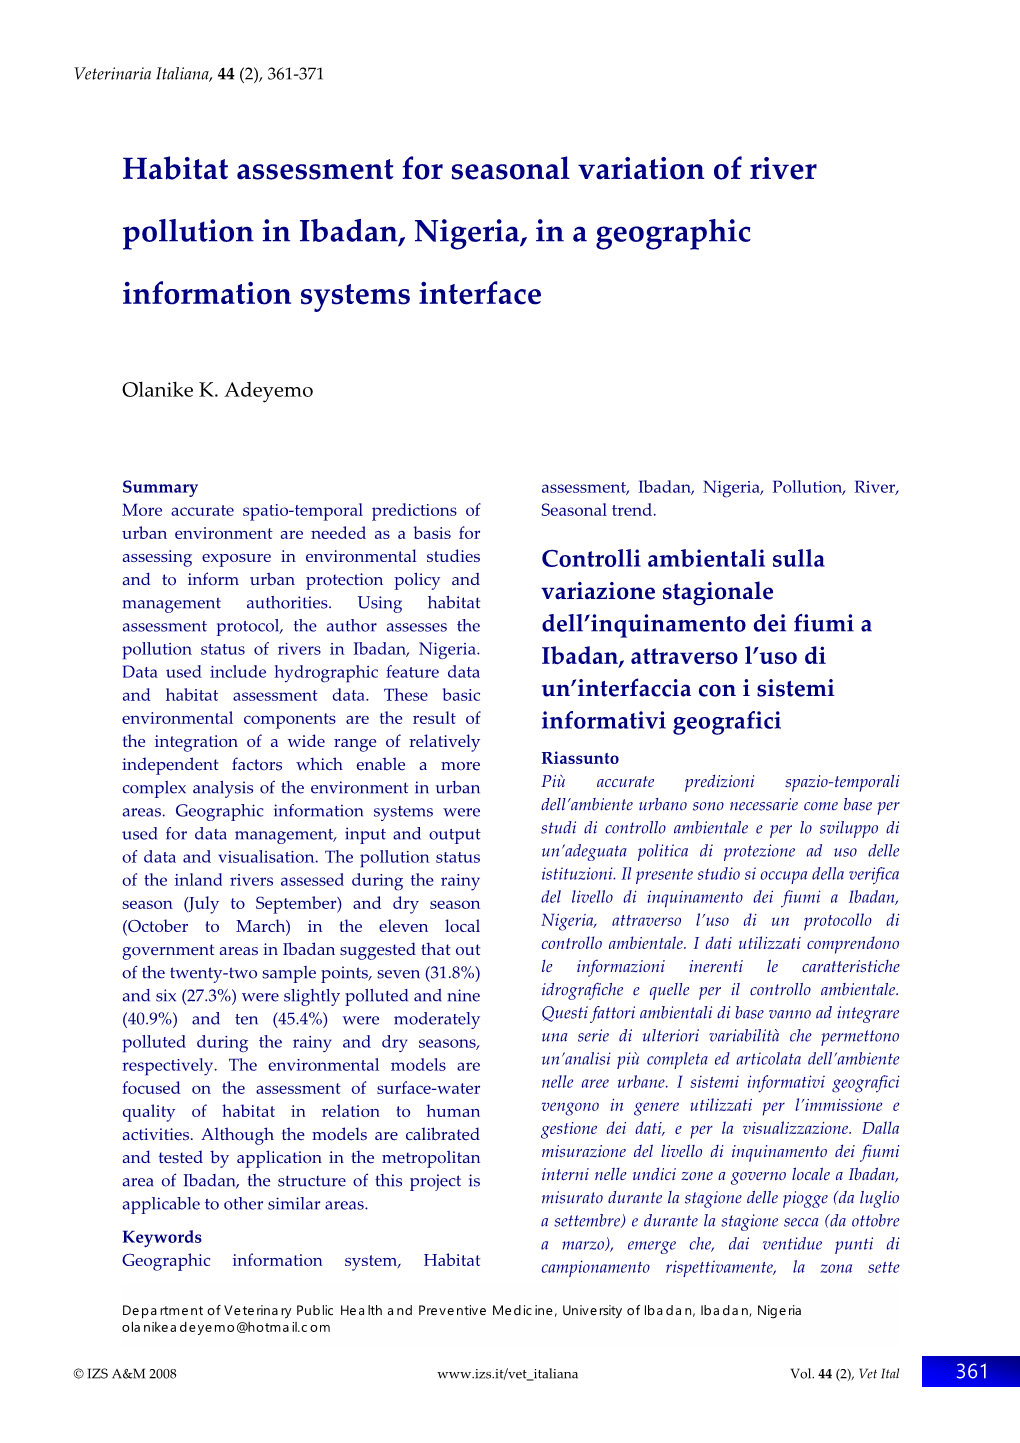 Habitat Assessment for Seasonal Variation of River Pollution in Ibadan, Nigeria, in a Geographic Information Systems Interface